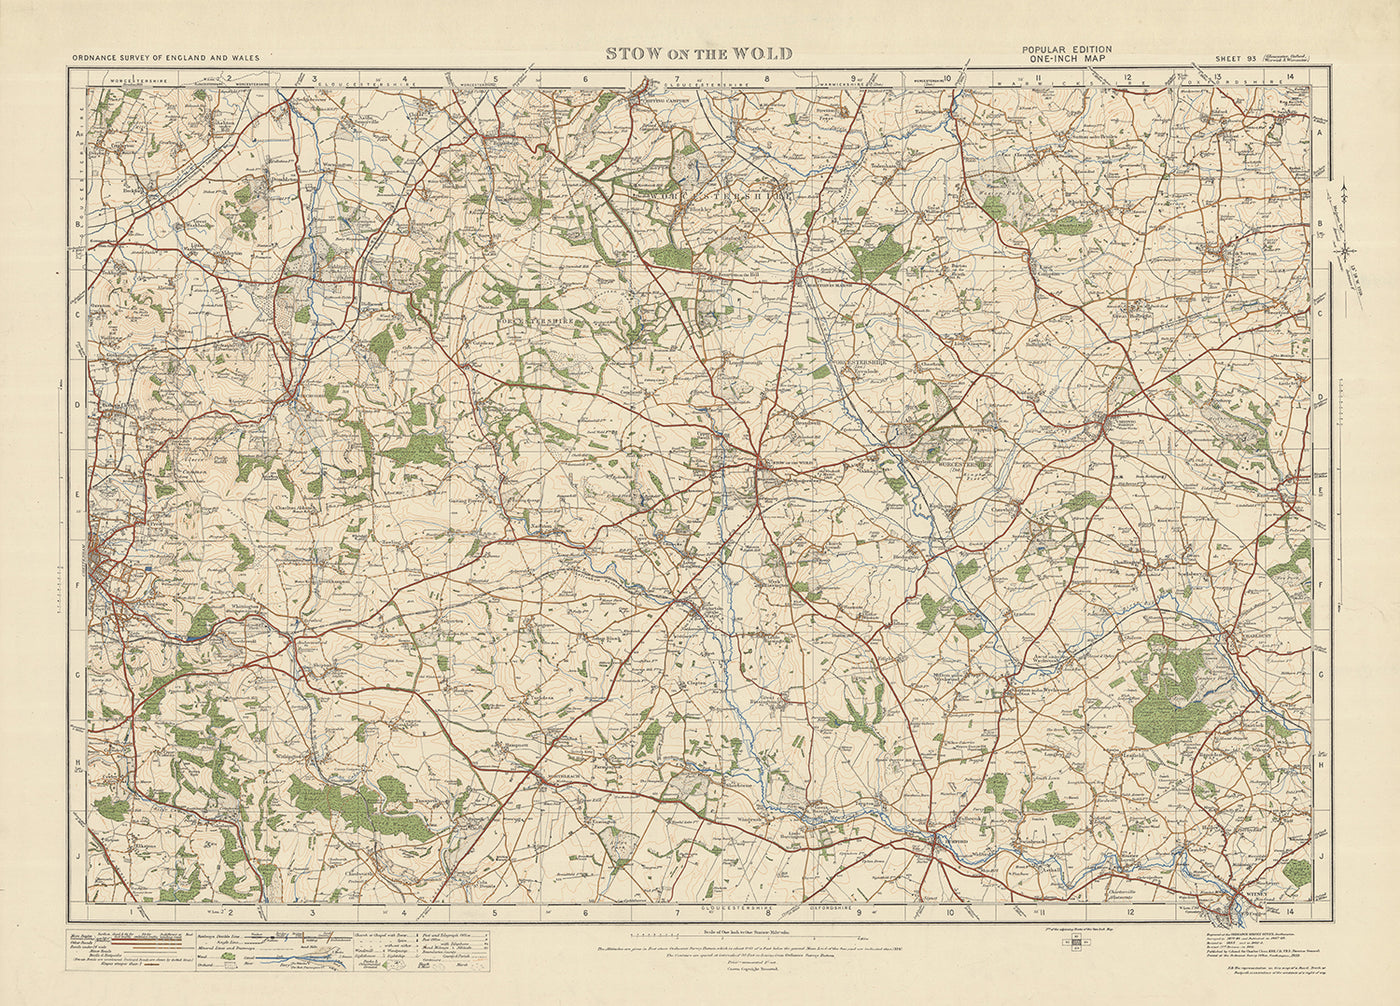 Old Ordnance Survey Map, Blatt 93 – Stow on the Wold, 1925: Moreton-in-Marsh, Chipping Norton, Bourton-on-the-Water, Witney, Cotswolds AONB